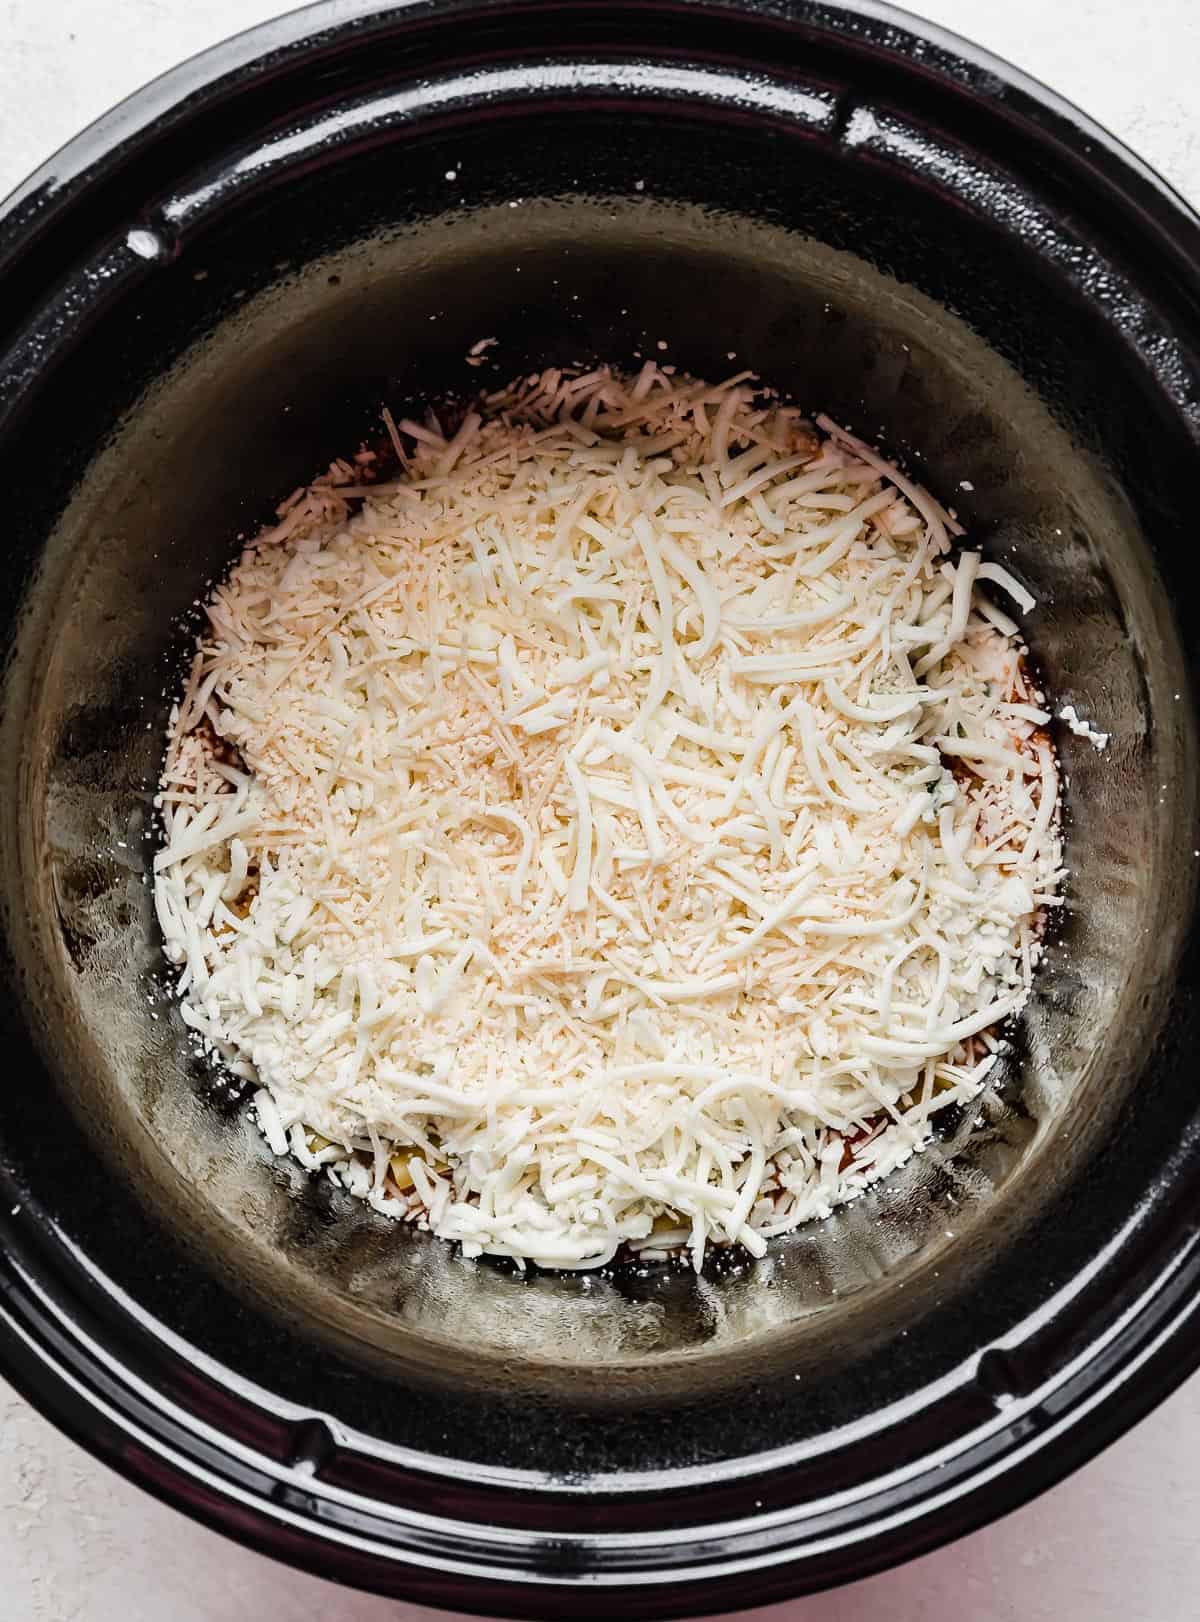 Shredded cheese in a round crock pot.